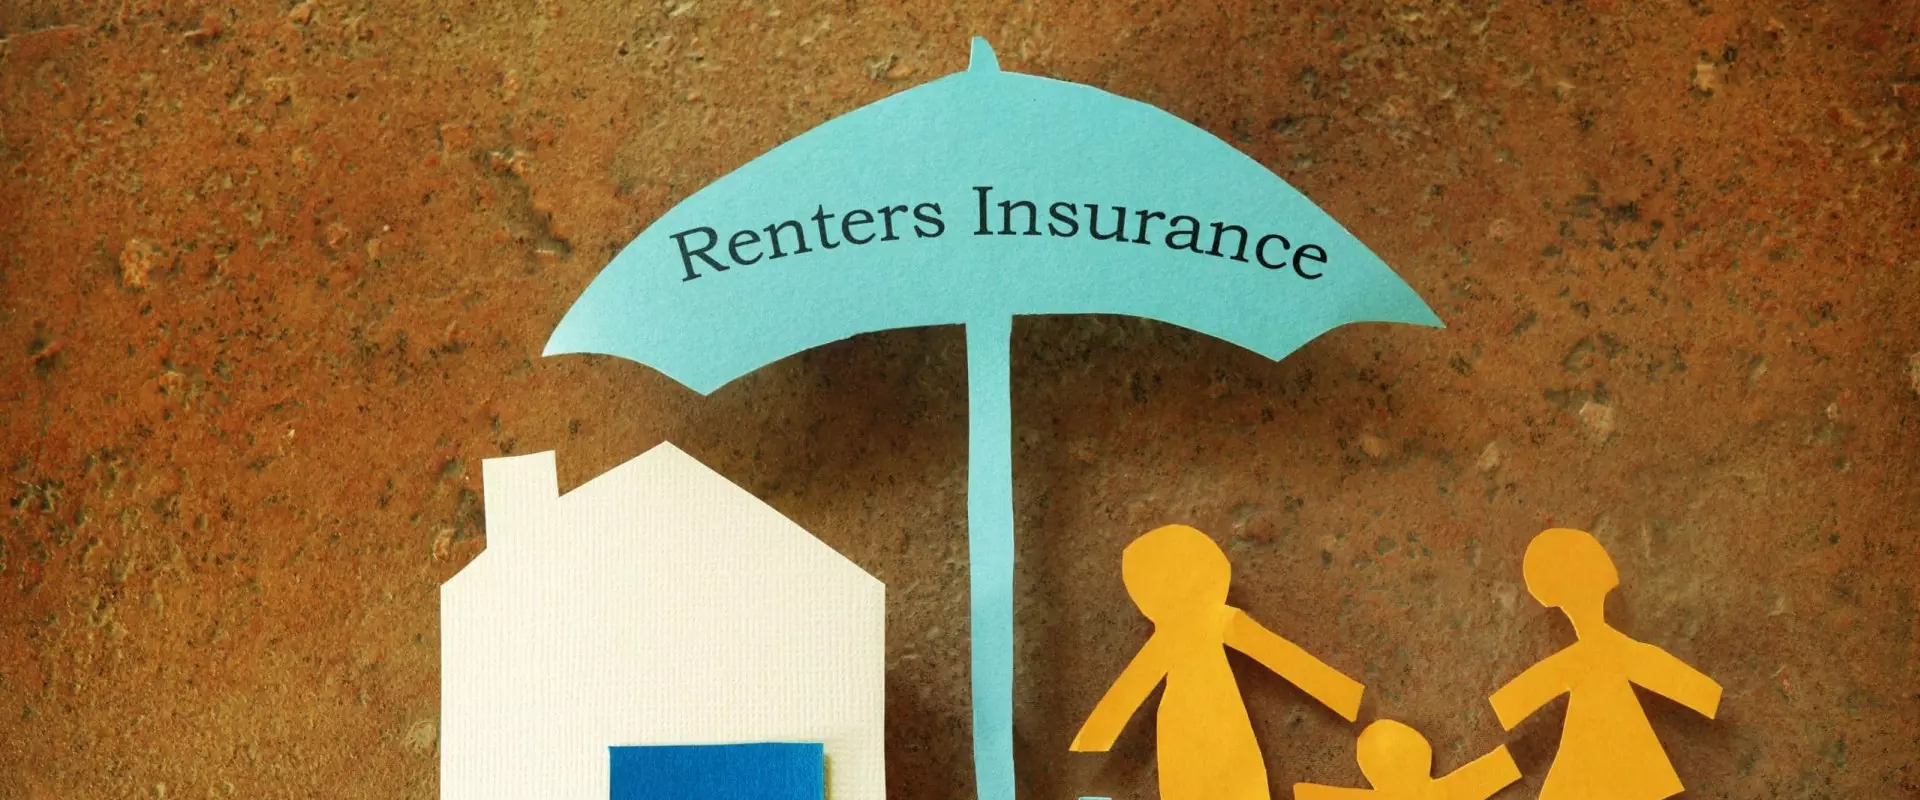 What is the typical price of renter’s insurance?